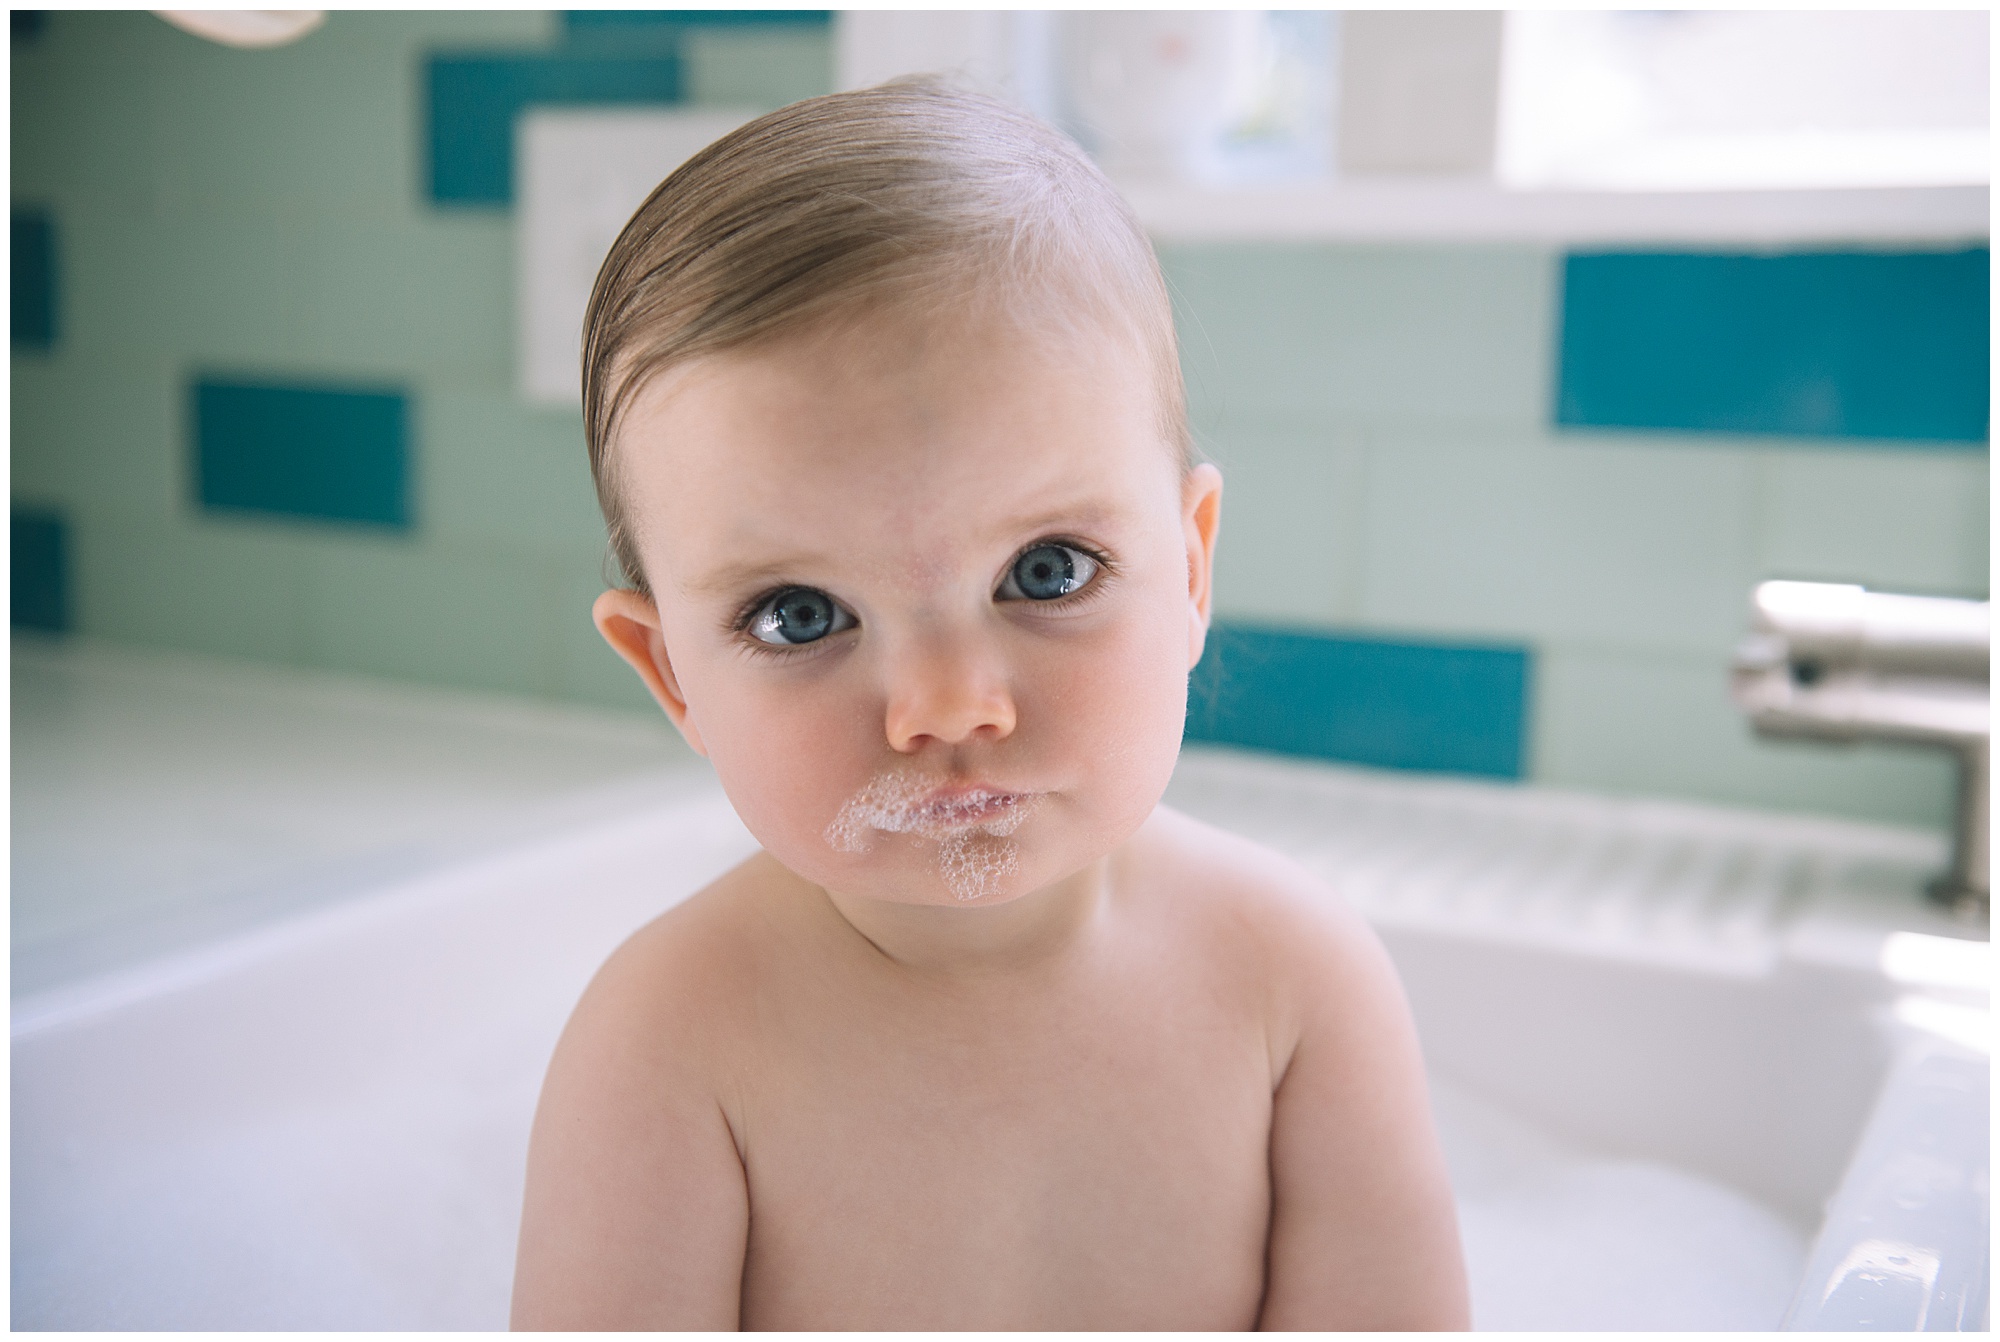 Baby in kitchen sink bath with bubbles on mouth and big blue eyes Emily Ann Photography Seattle Family and Newborn Photographer.